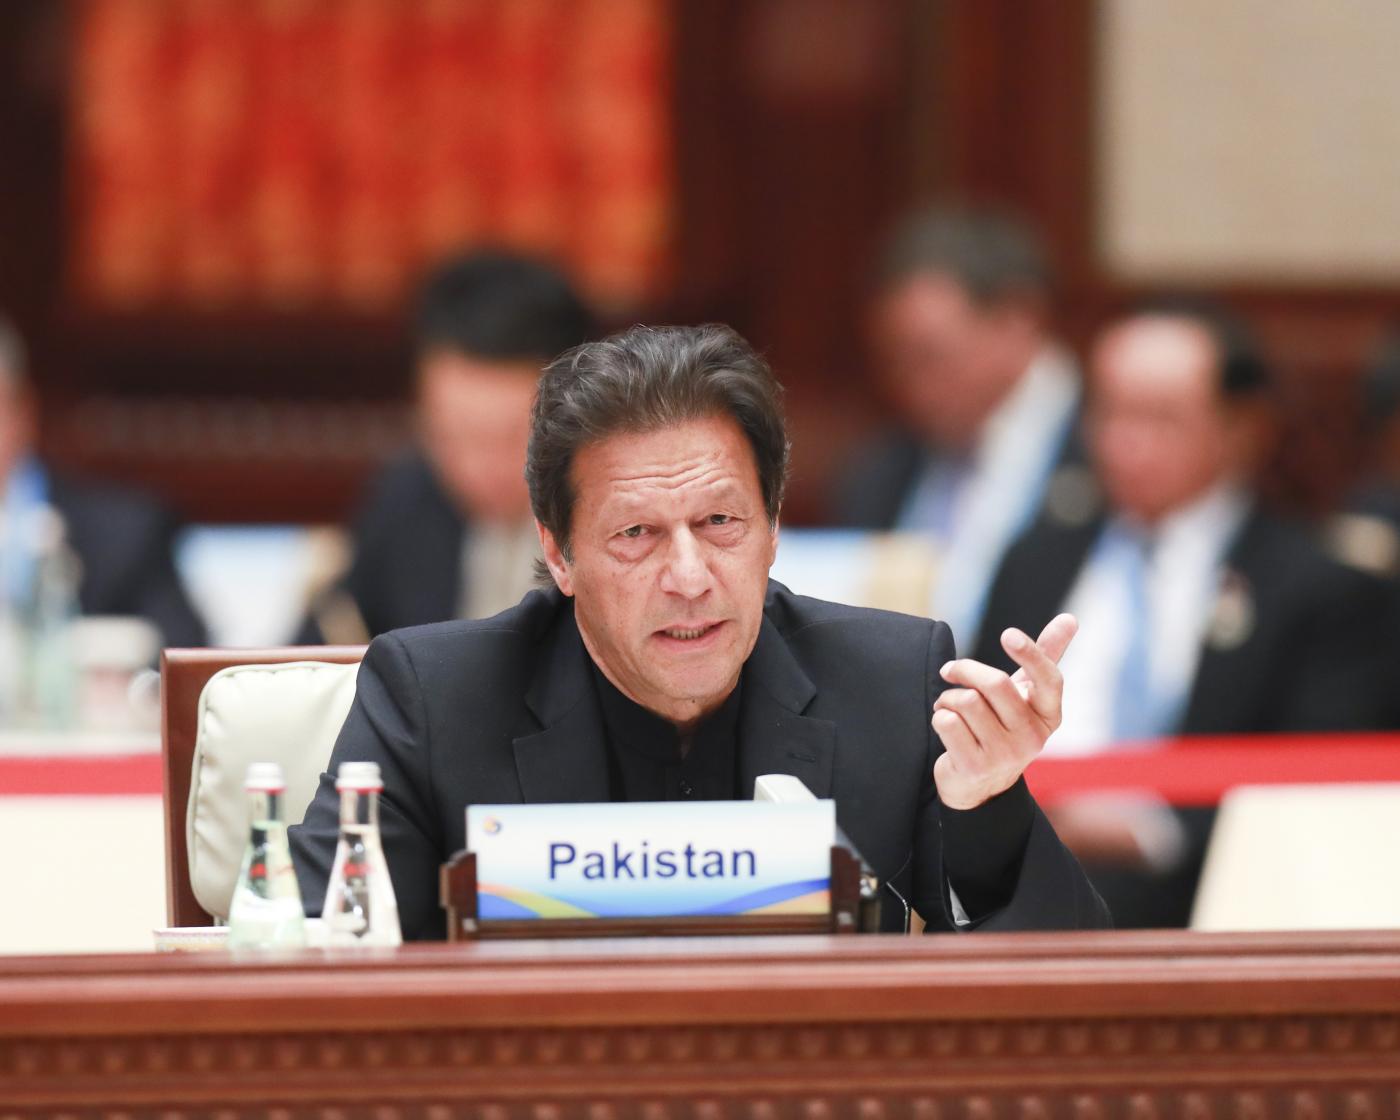 BEIJING, April 27, 2019 (Xinhua) -- Pakistani Prime Minister Imran Khan speaks at the leaders' roundtable meeting of the Second Belt and Road Forum for International Cooperation at the Yanqi Lake International Convention Center in Beijing, capital of China, April 27, 2019. (Xinhua/Pang Xinglei/IANS) by .